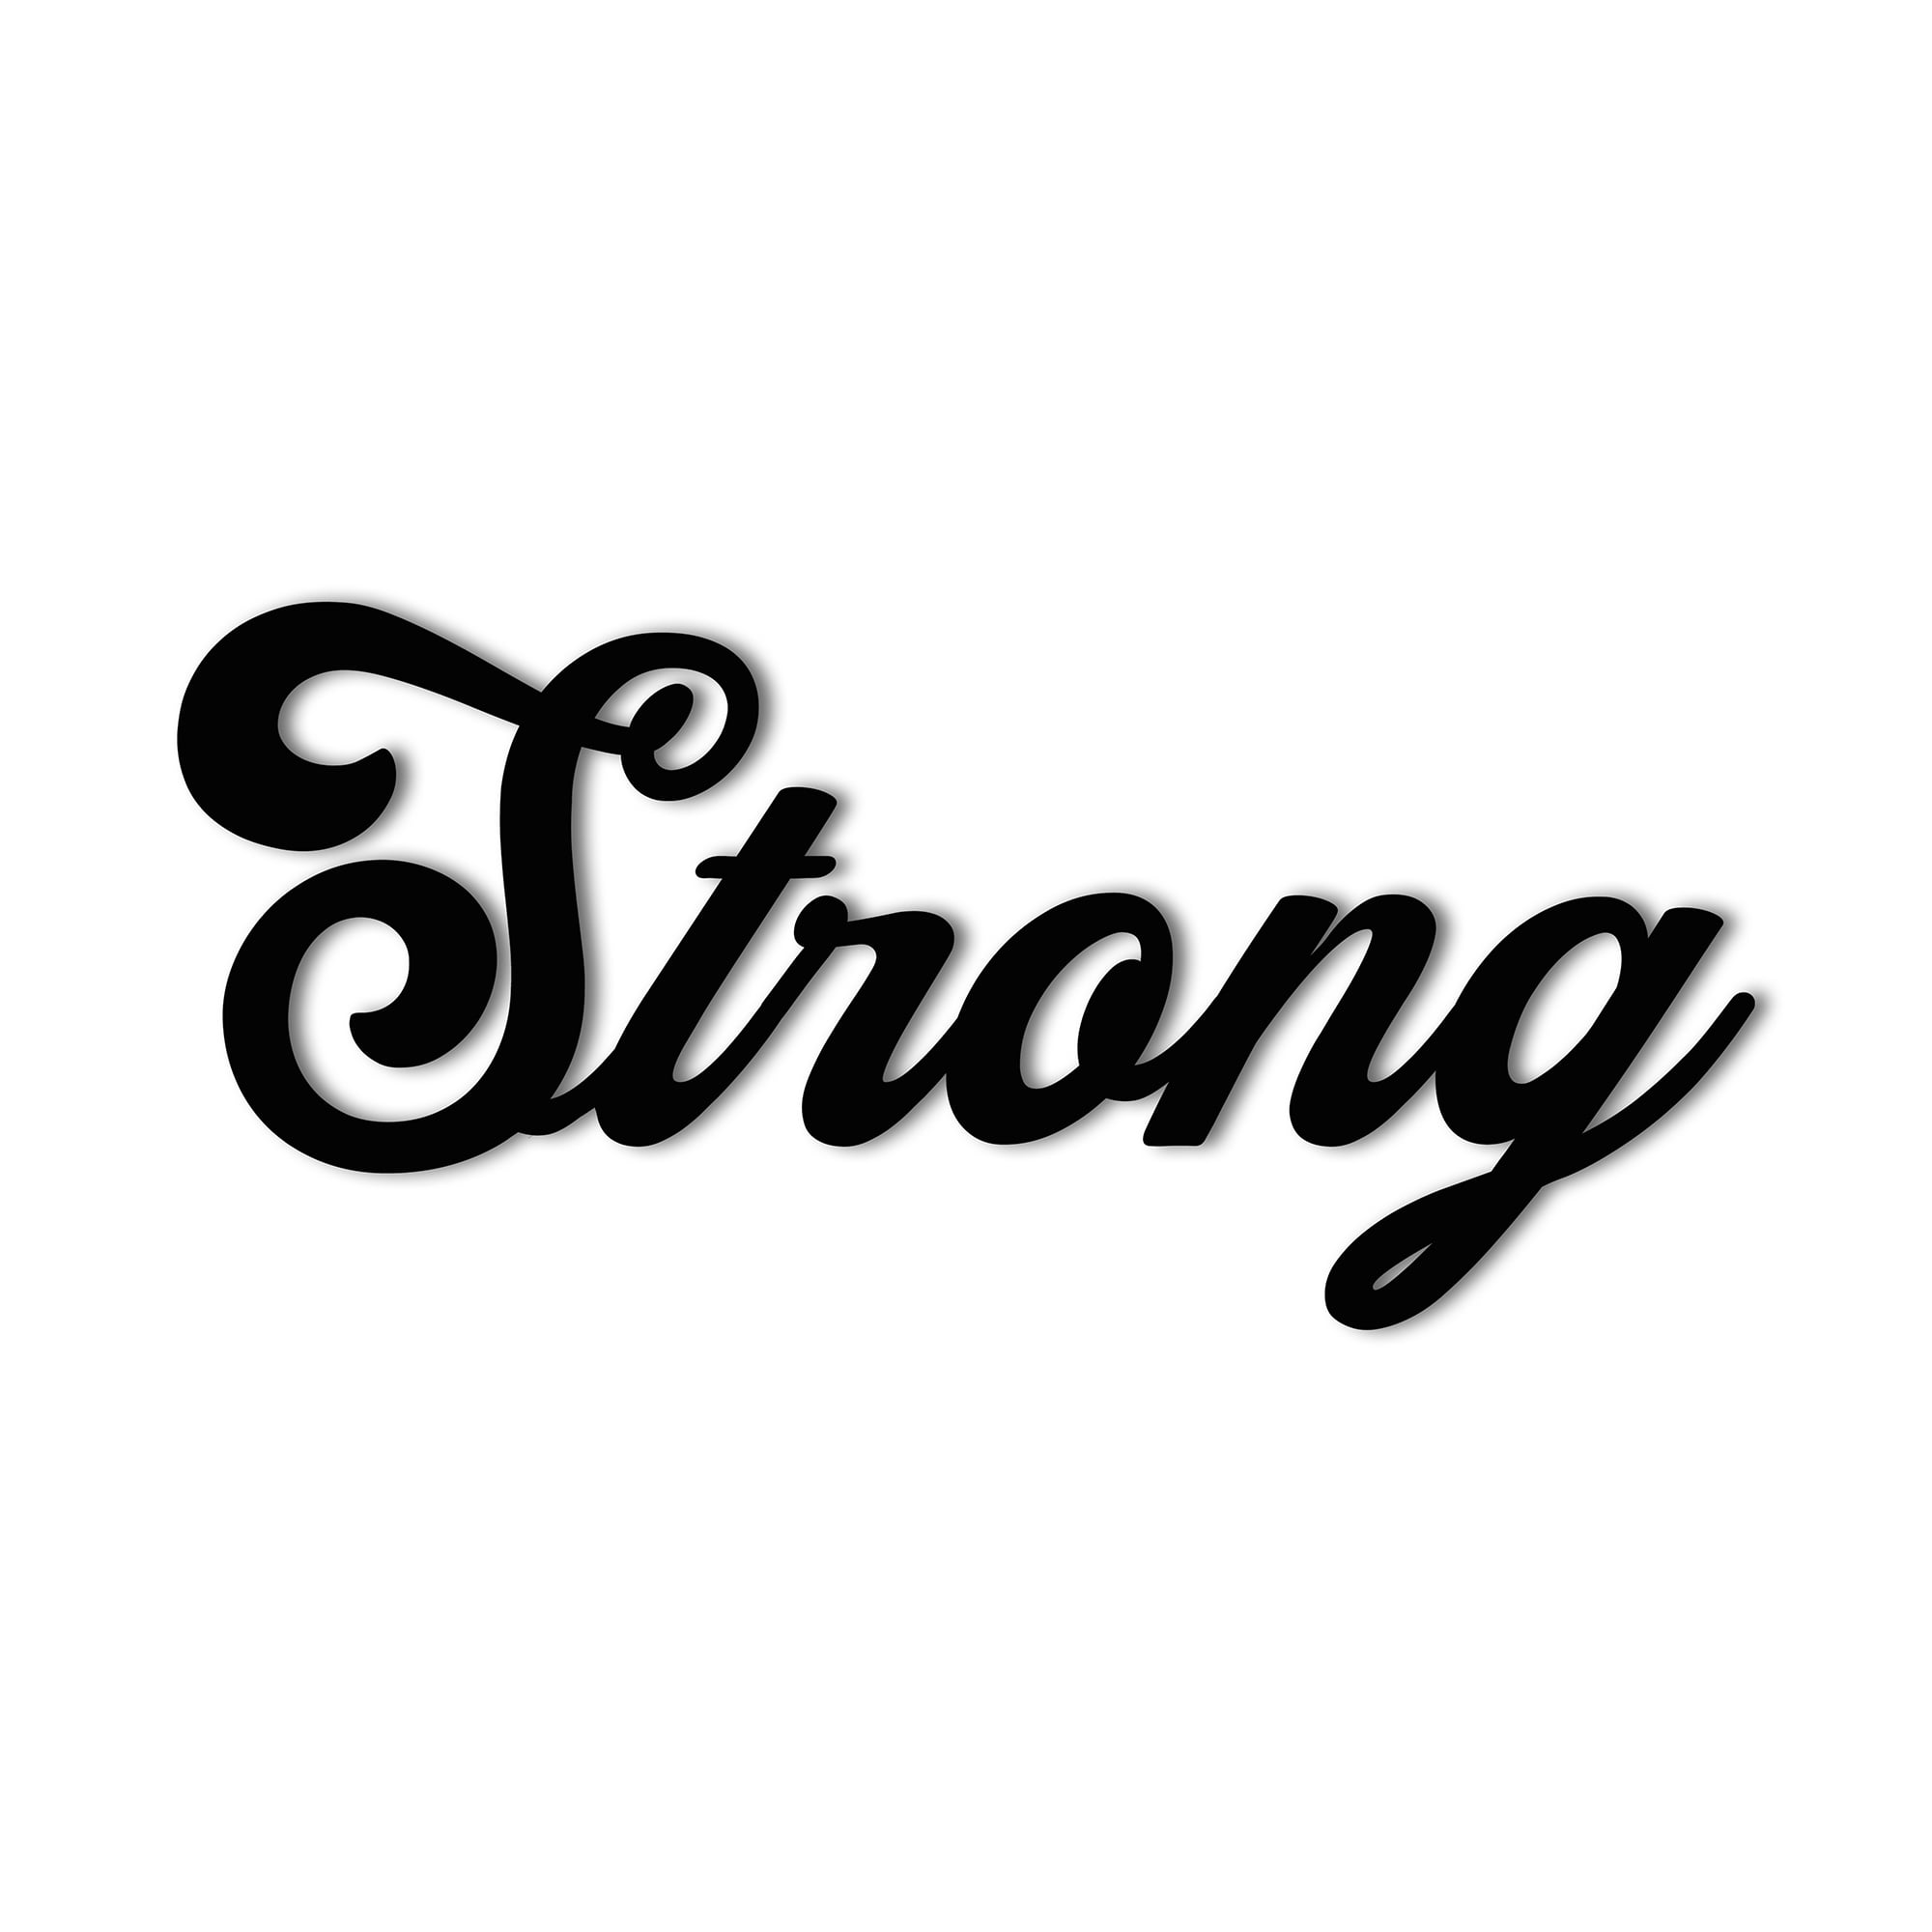 Strong - Metal Home Gym Sign Metal Word Art for Body Builder Fitness Home  Gym Motivational Wall Accent Studio Decor Sign - 3 Sizes / 13 Colors 